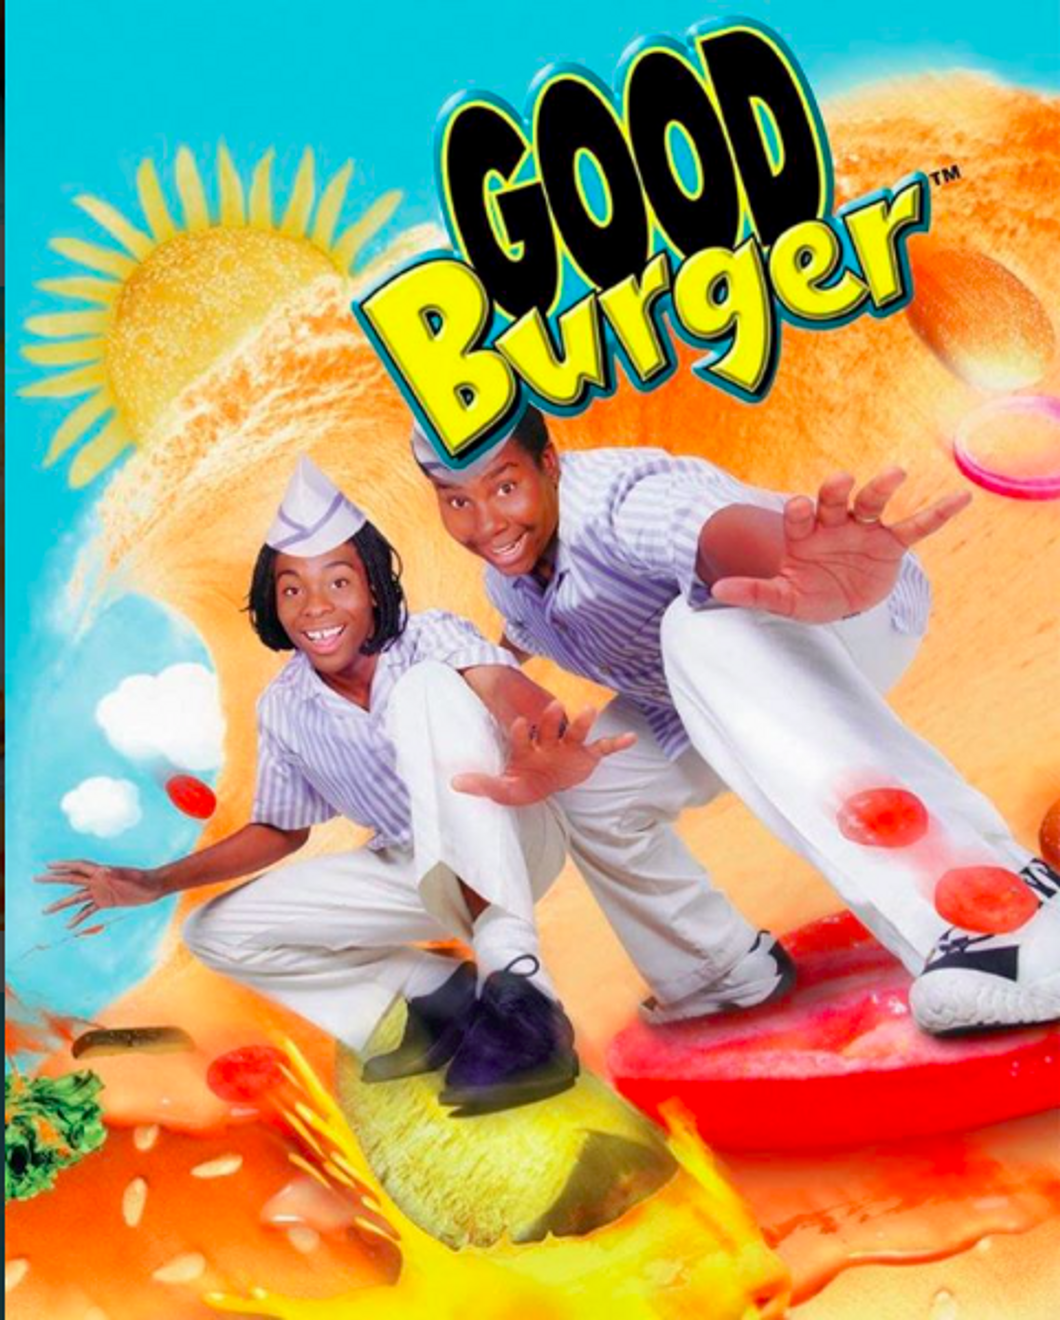 5 Reasons Why "Good Burger," Is the greatest movie of all time